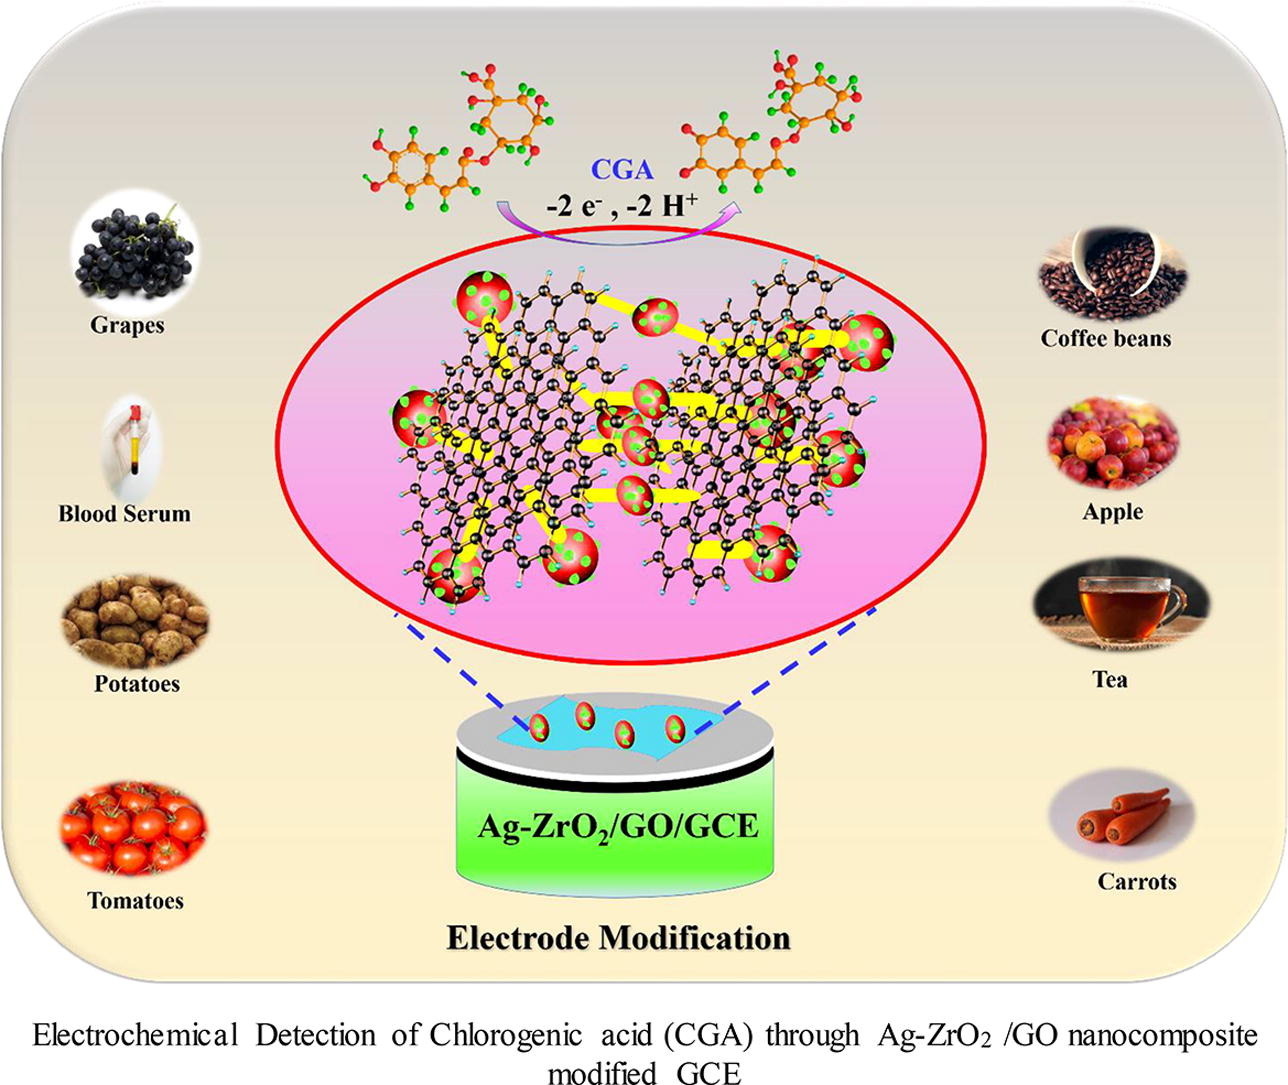 A portable advanced electrocatalyst for polyphenolic chlorogenic acid evaluation in food samples